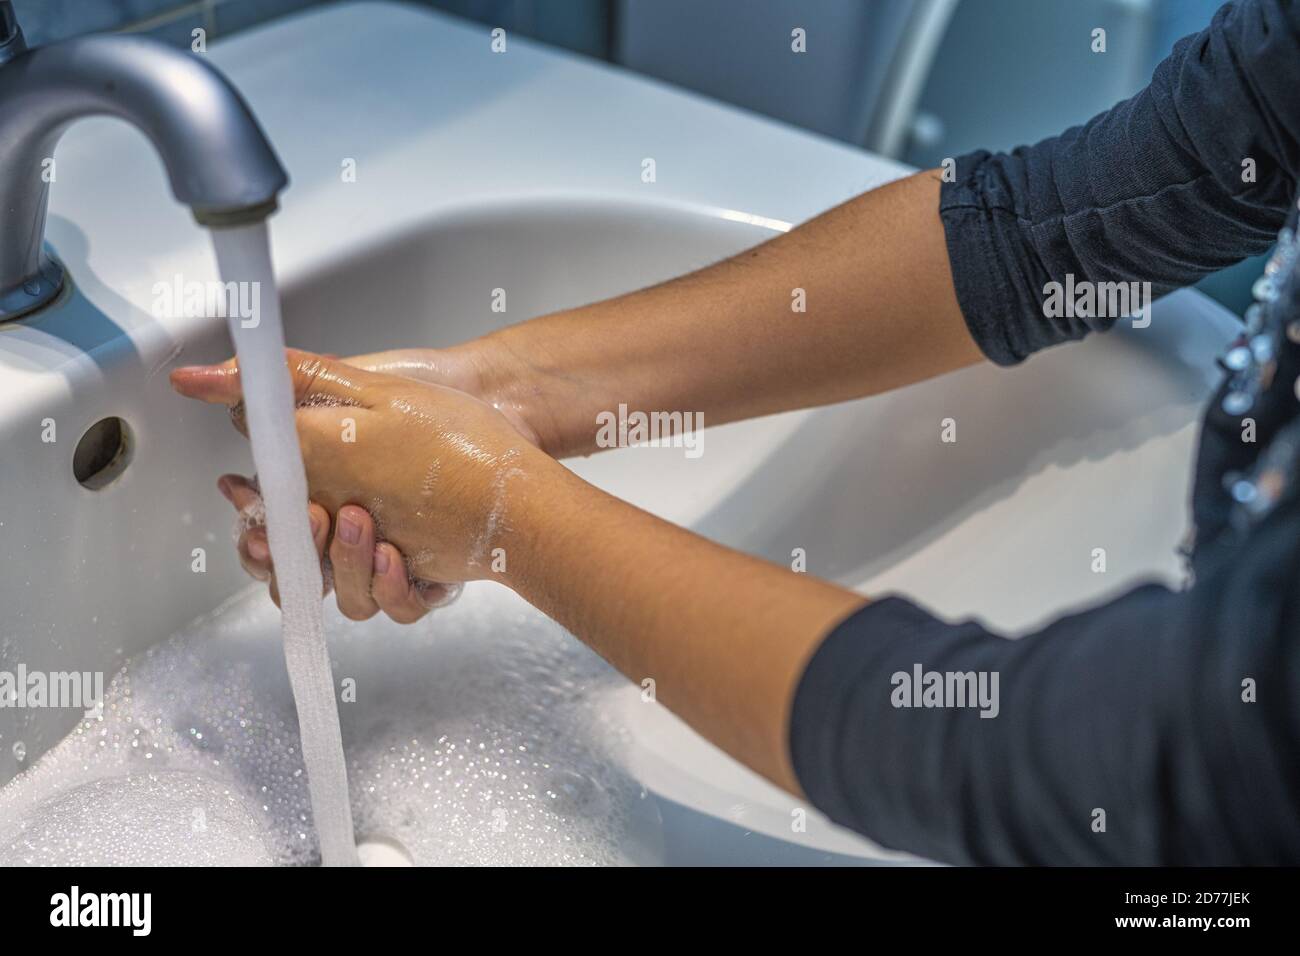 Washing hands in covid-19 times. Stock Photo